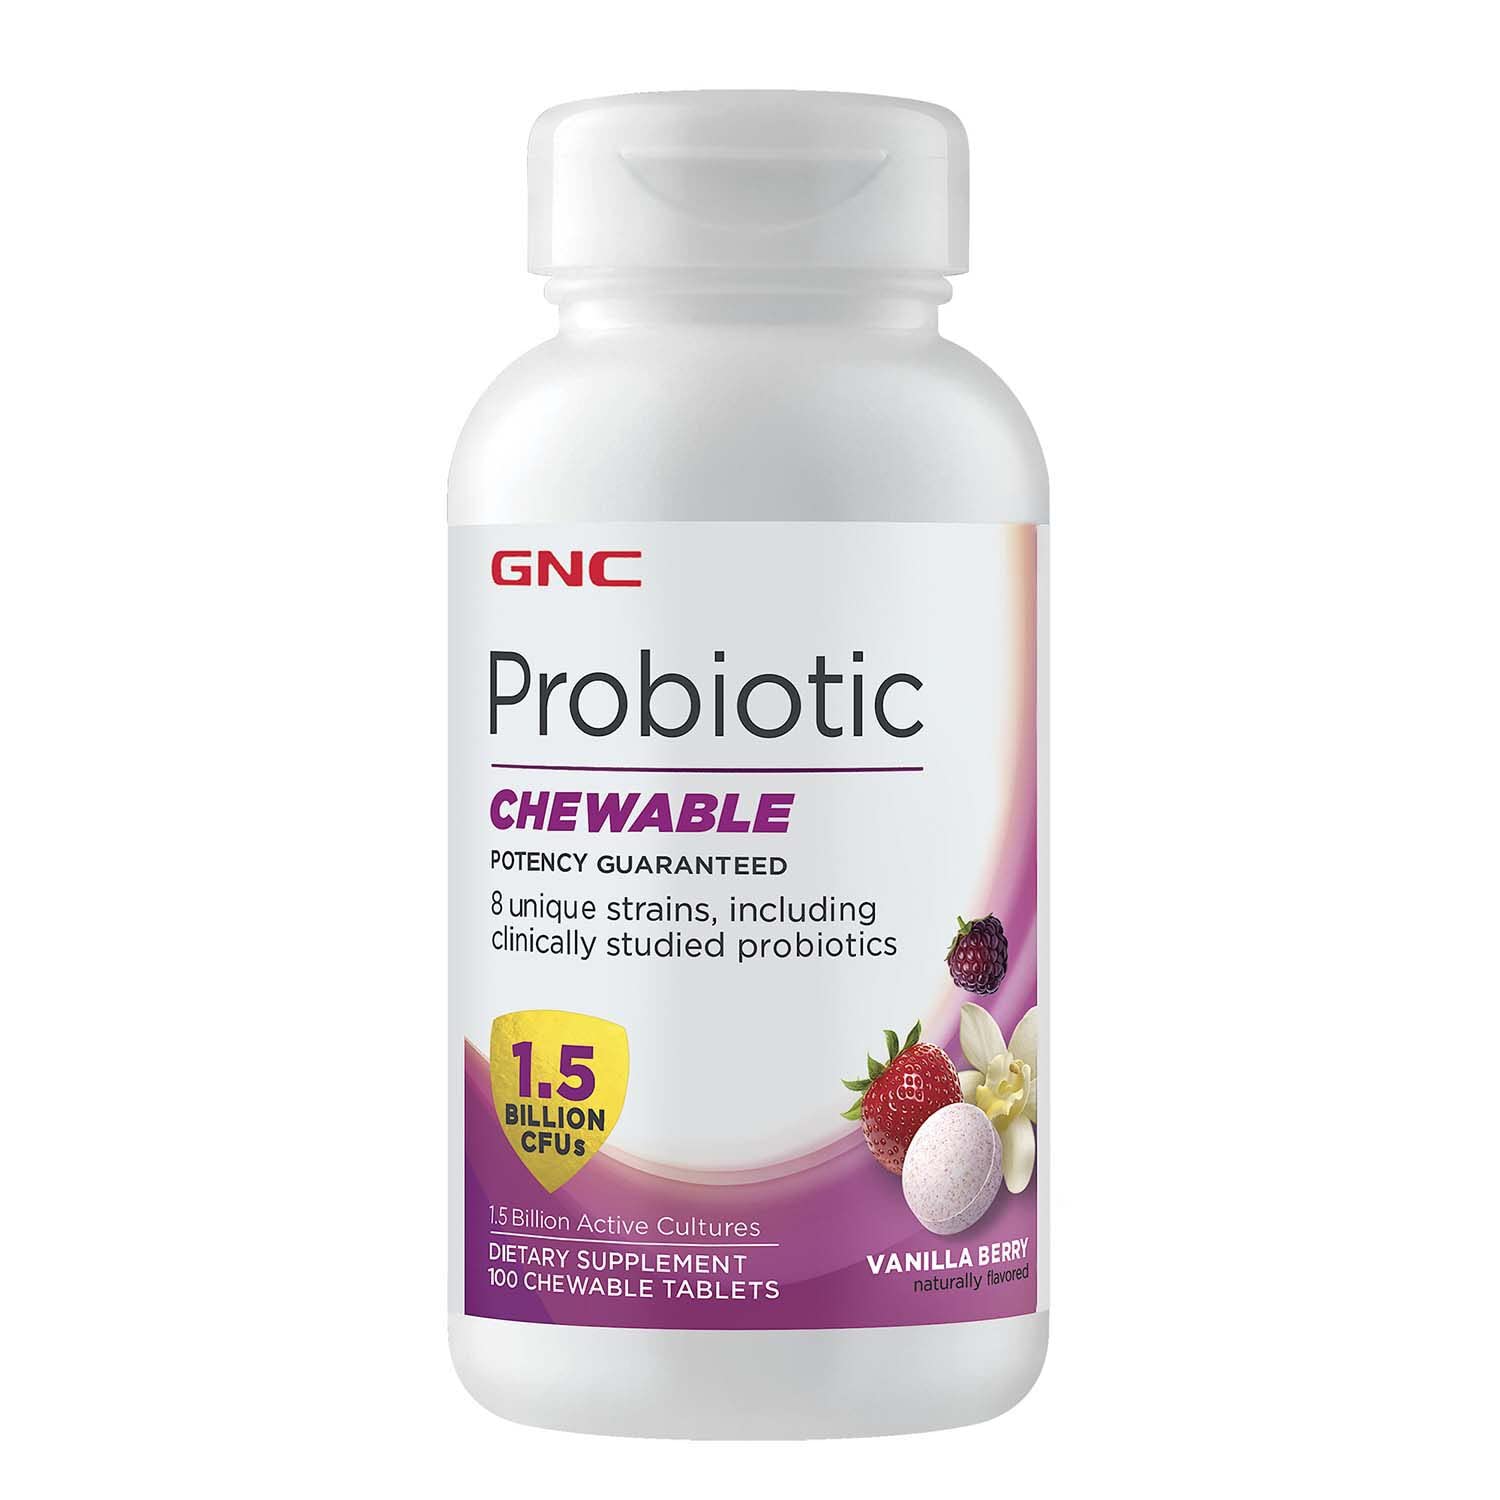 GNC Probiotic Chewable with 1.5 Billion CFUs - Vanilla Berry, 100 Tablets, Daily Probiotic Support